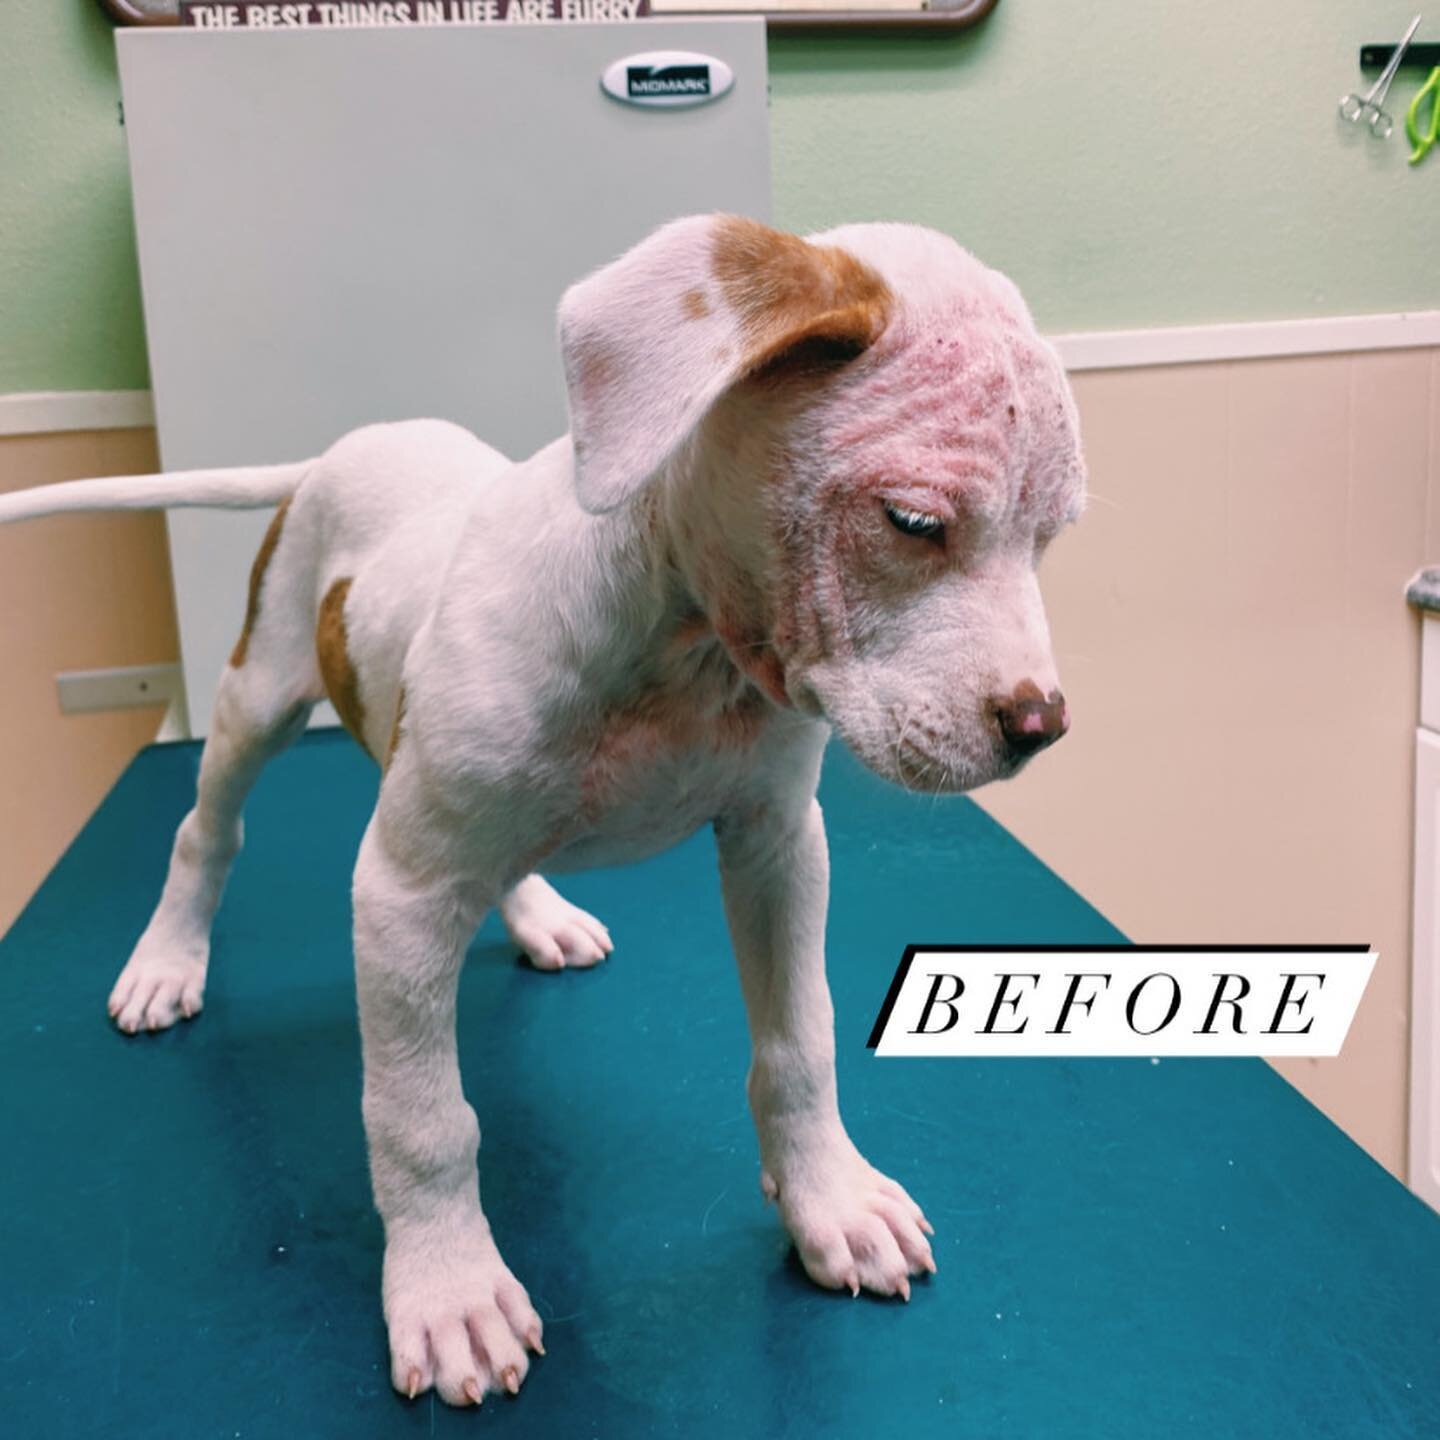 Bravecto is great at taking care of fleas and ticks, but did you know it also can also take care of Demodex Mange? 
Check out this great transformation of our friend after one month of Bravecto! 
🐾❤️🐶

Now through October 13, 2022 the Bravecto inst